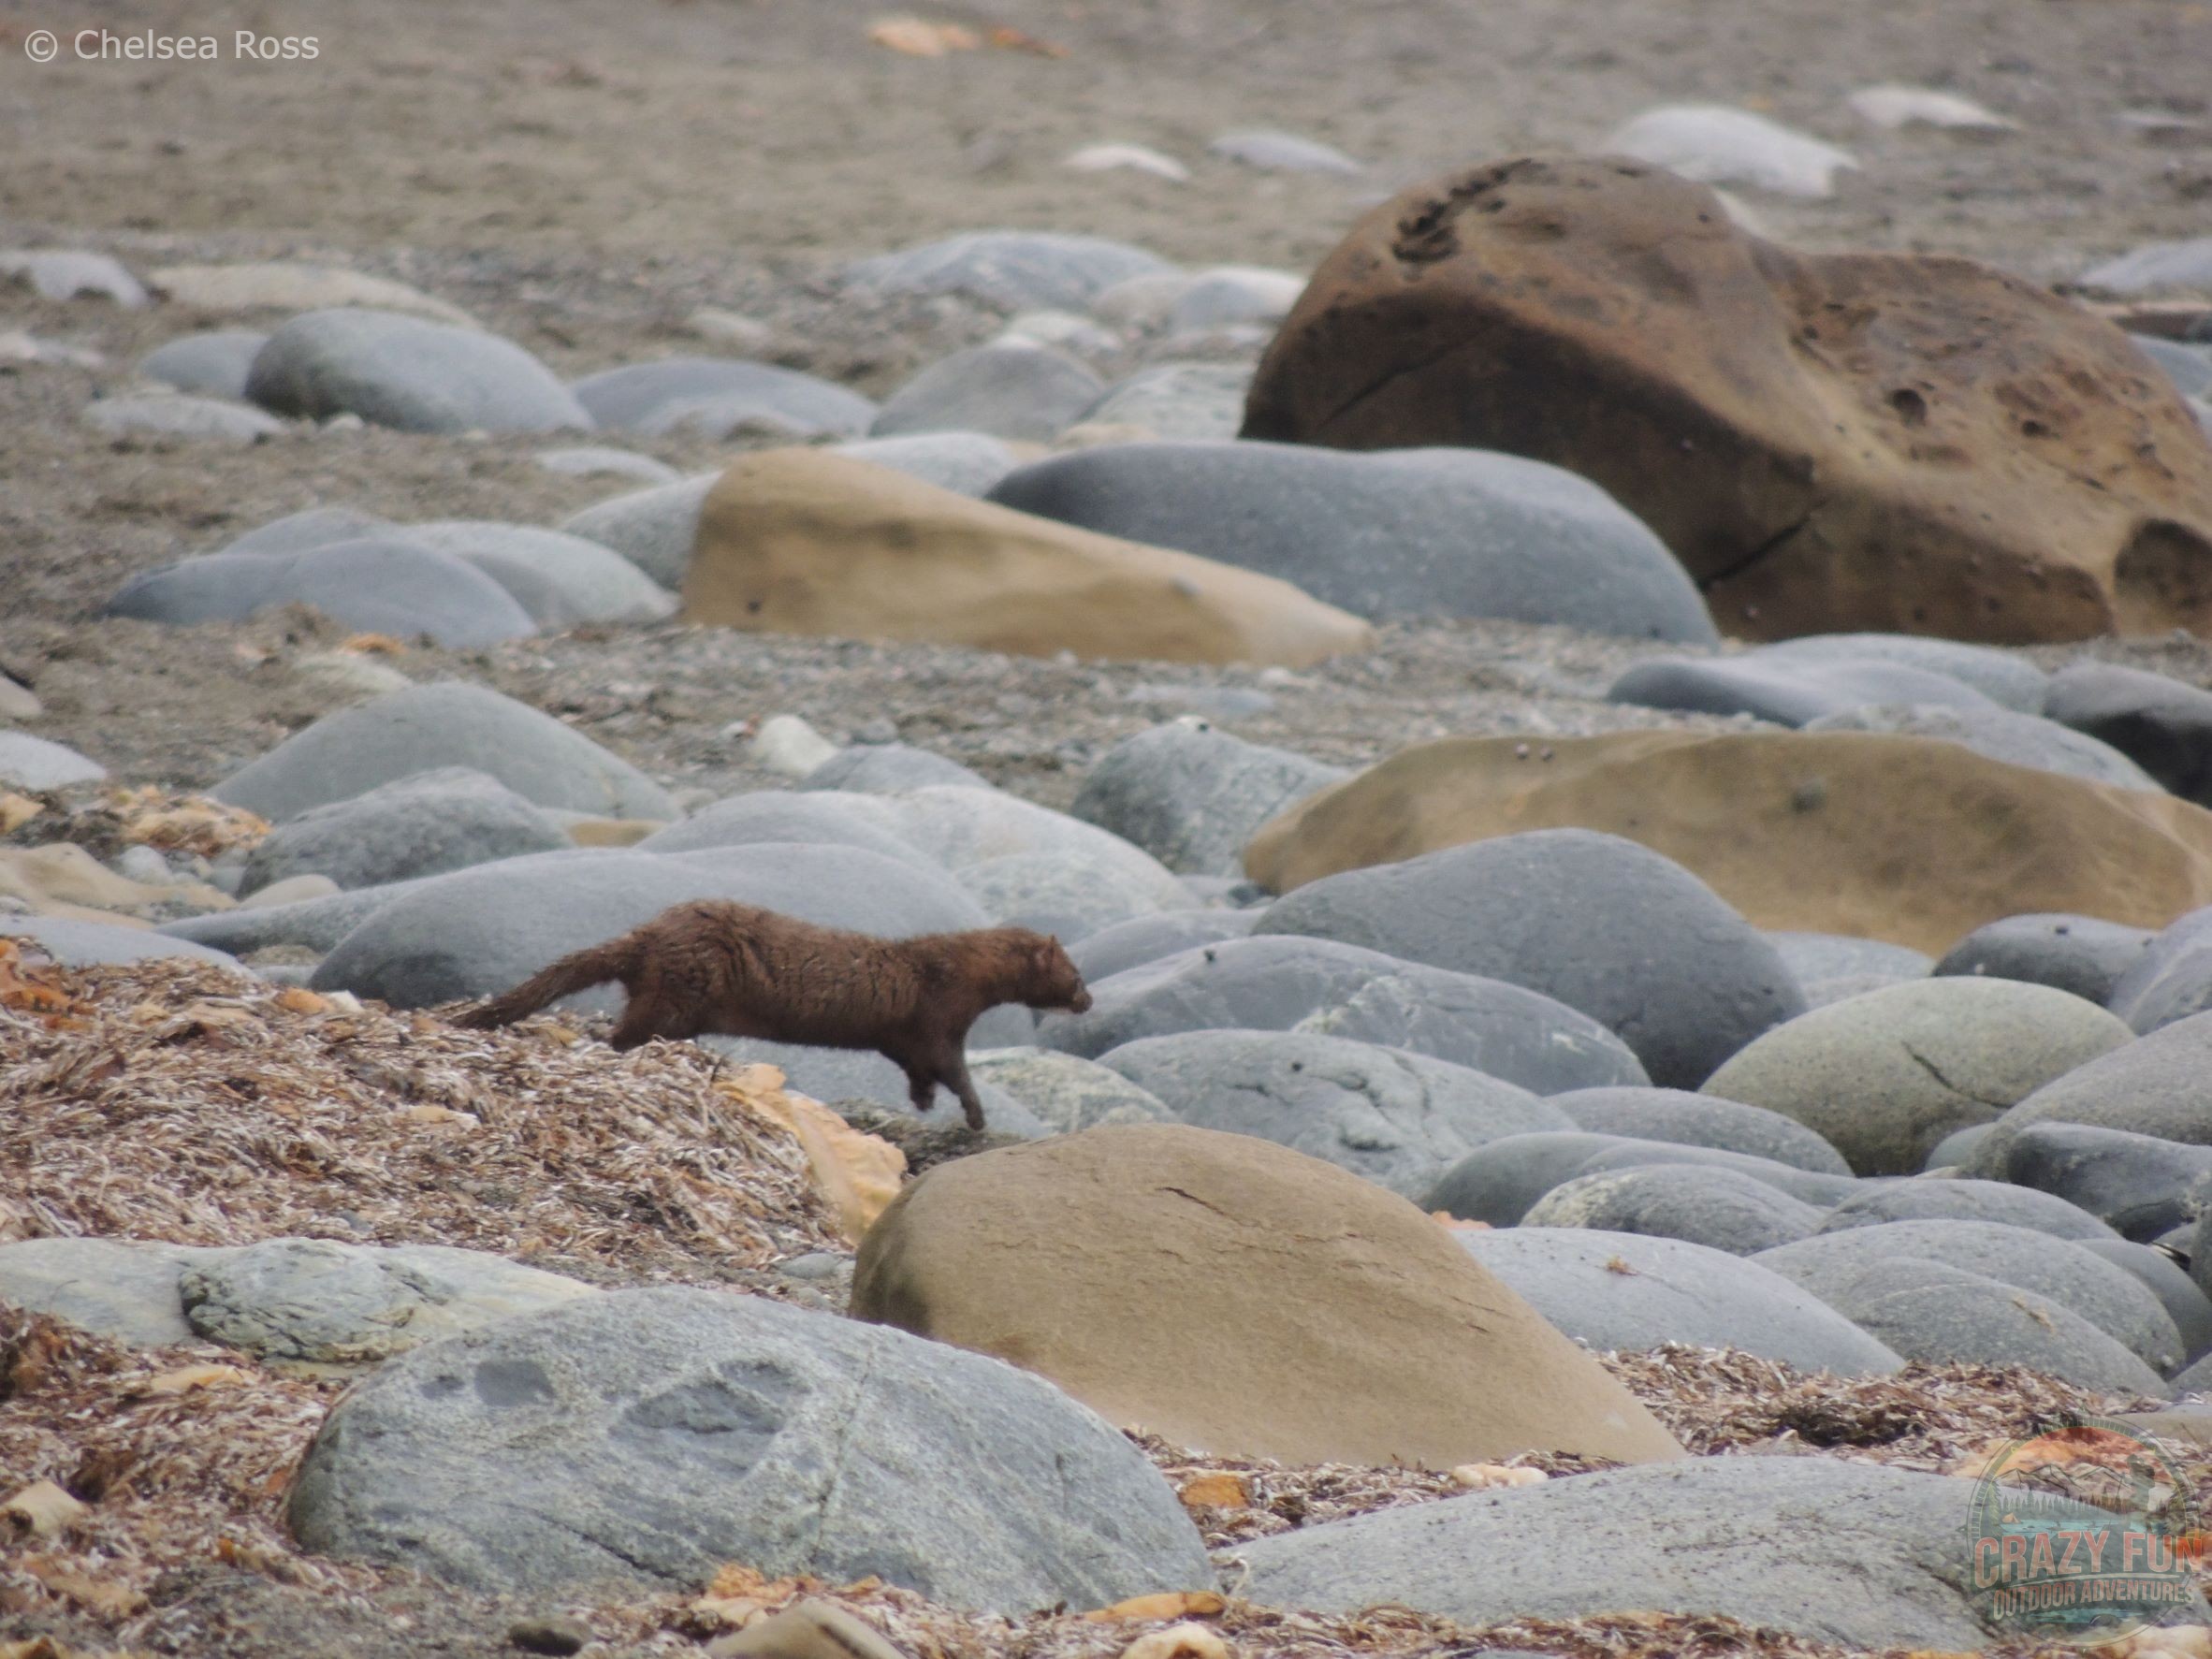 A brown marten on grey and brownrocks